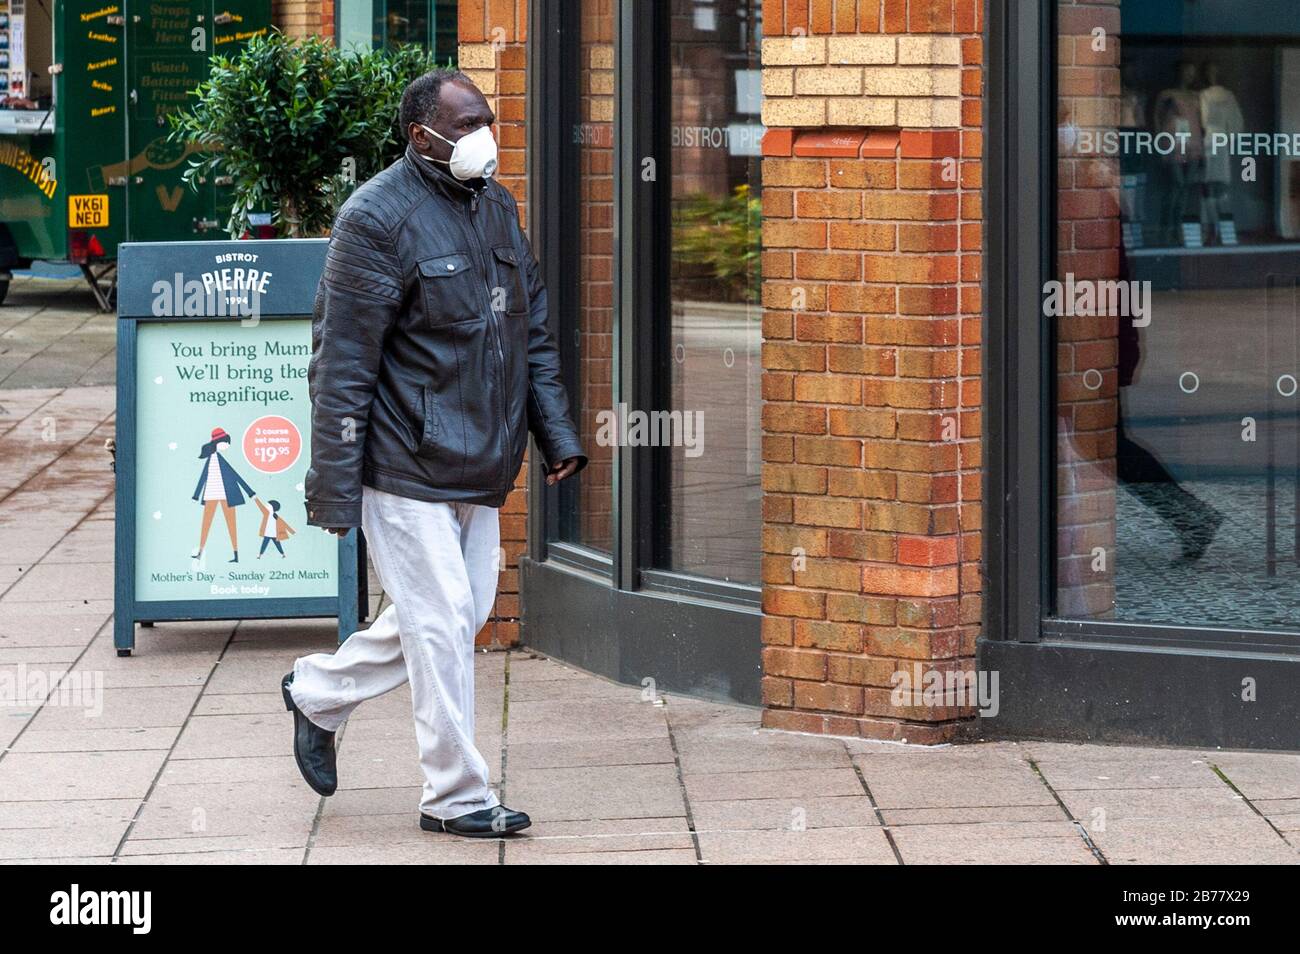 Coventry, West Midlands, UK. 14th Mar, 2020. The Coronavirus pandemic, or Covid-19, forced shoppers to wear protective masks in an almost deserted Coventry city centre this morning. Credit: Andy Gibson/Alamy Live News Stock Photo